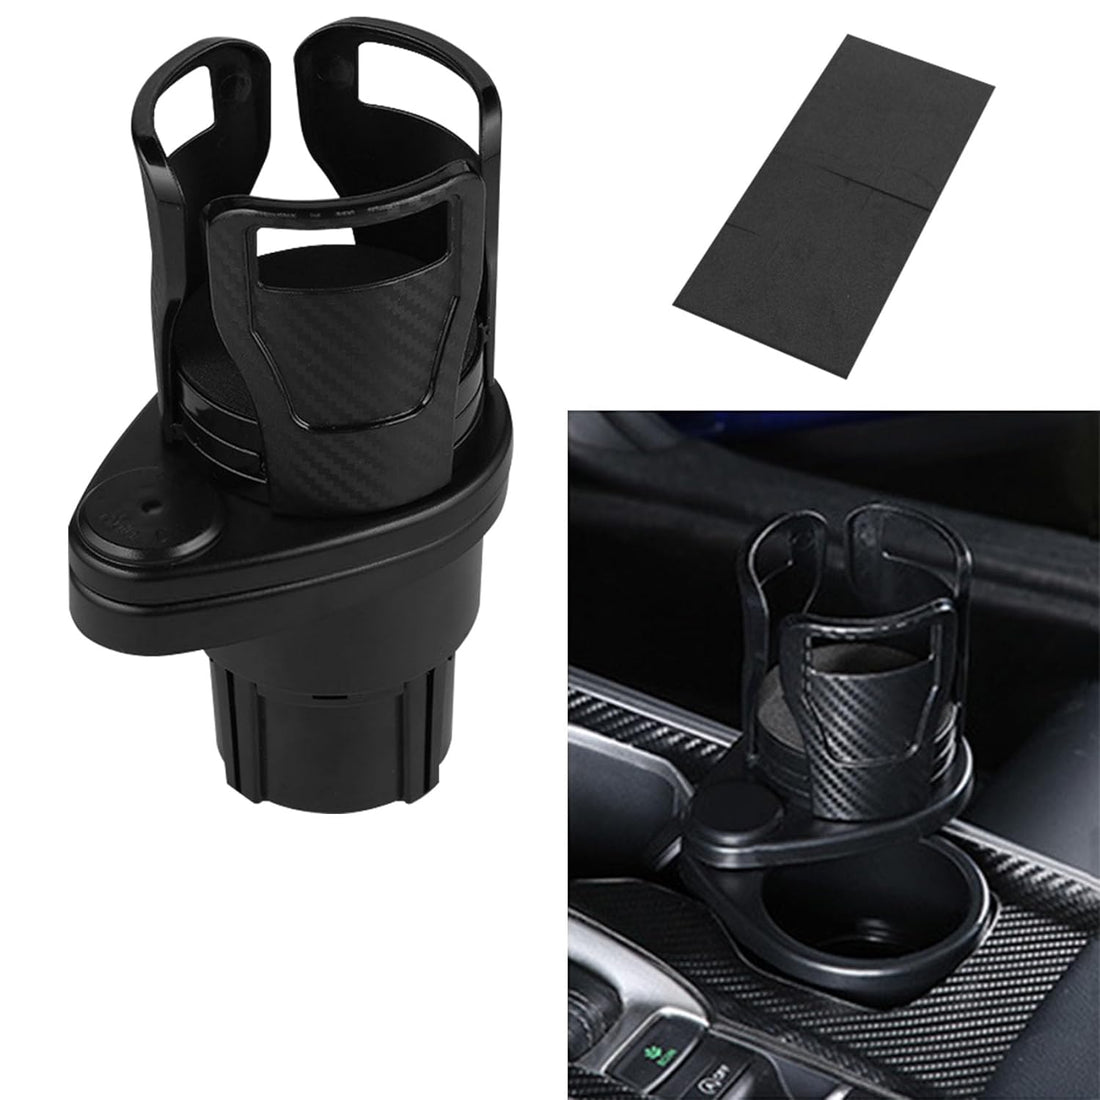 Cup Holder Expander for Car, Car Large Cup Holder Expander, Multifunctional Car Cup Holder with 360° Rotating Adjustable Base, Car Cup Holder Expander Adapter Suitable for Bottles Cups Drinks Snack